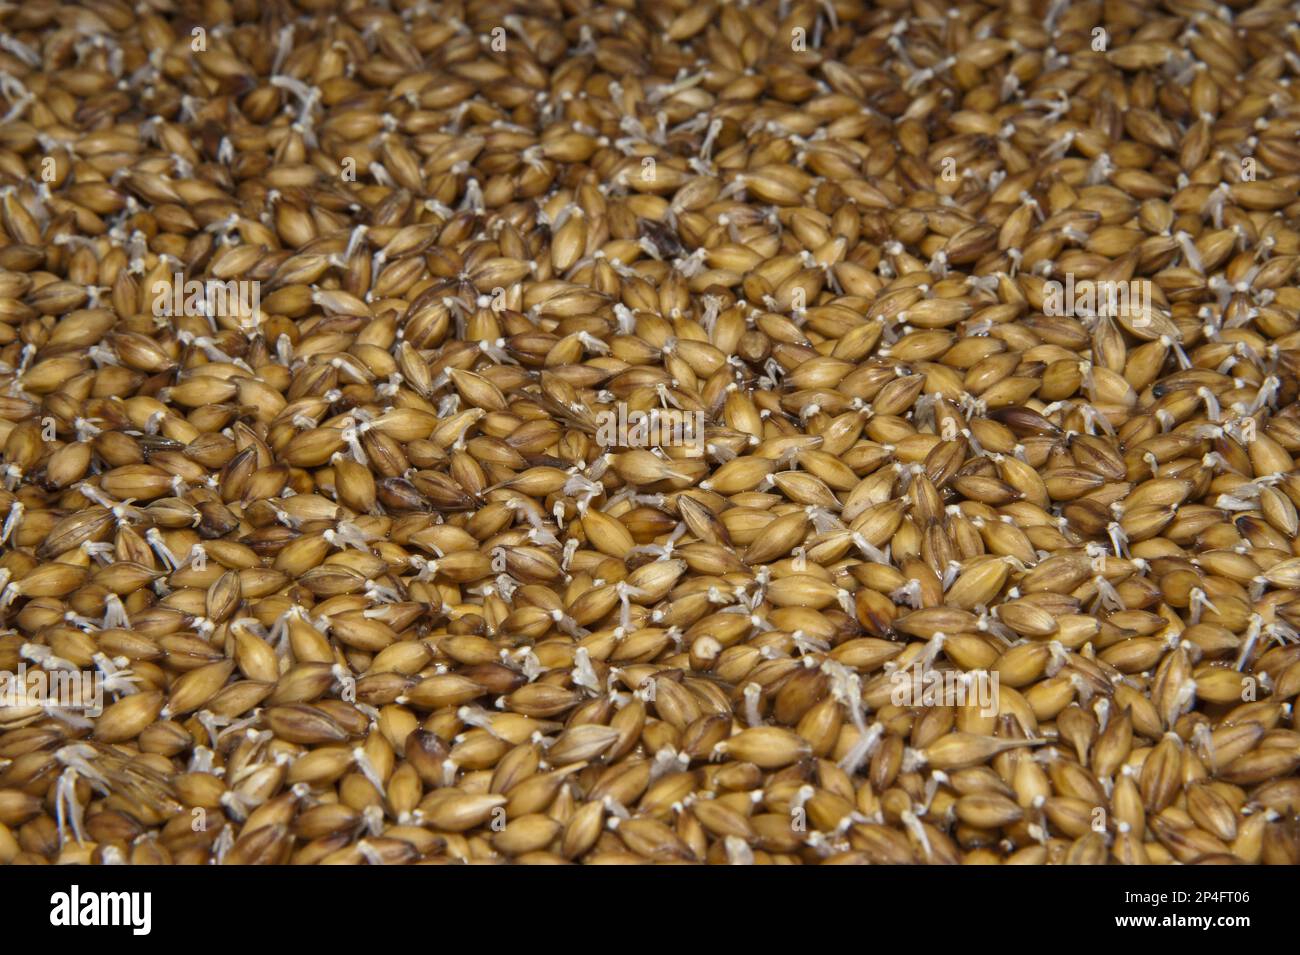 Barley (Hordeum vulgare) hydroponic growing system crop, solution of water and nutrients flowing over seeds, Herefordshire, England, United Kingdom Stock Photo